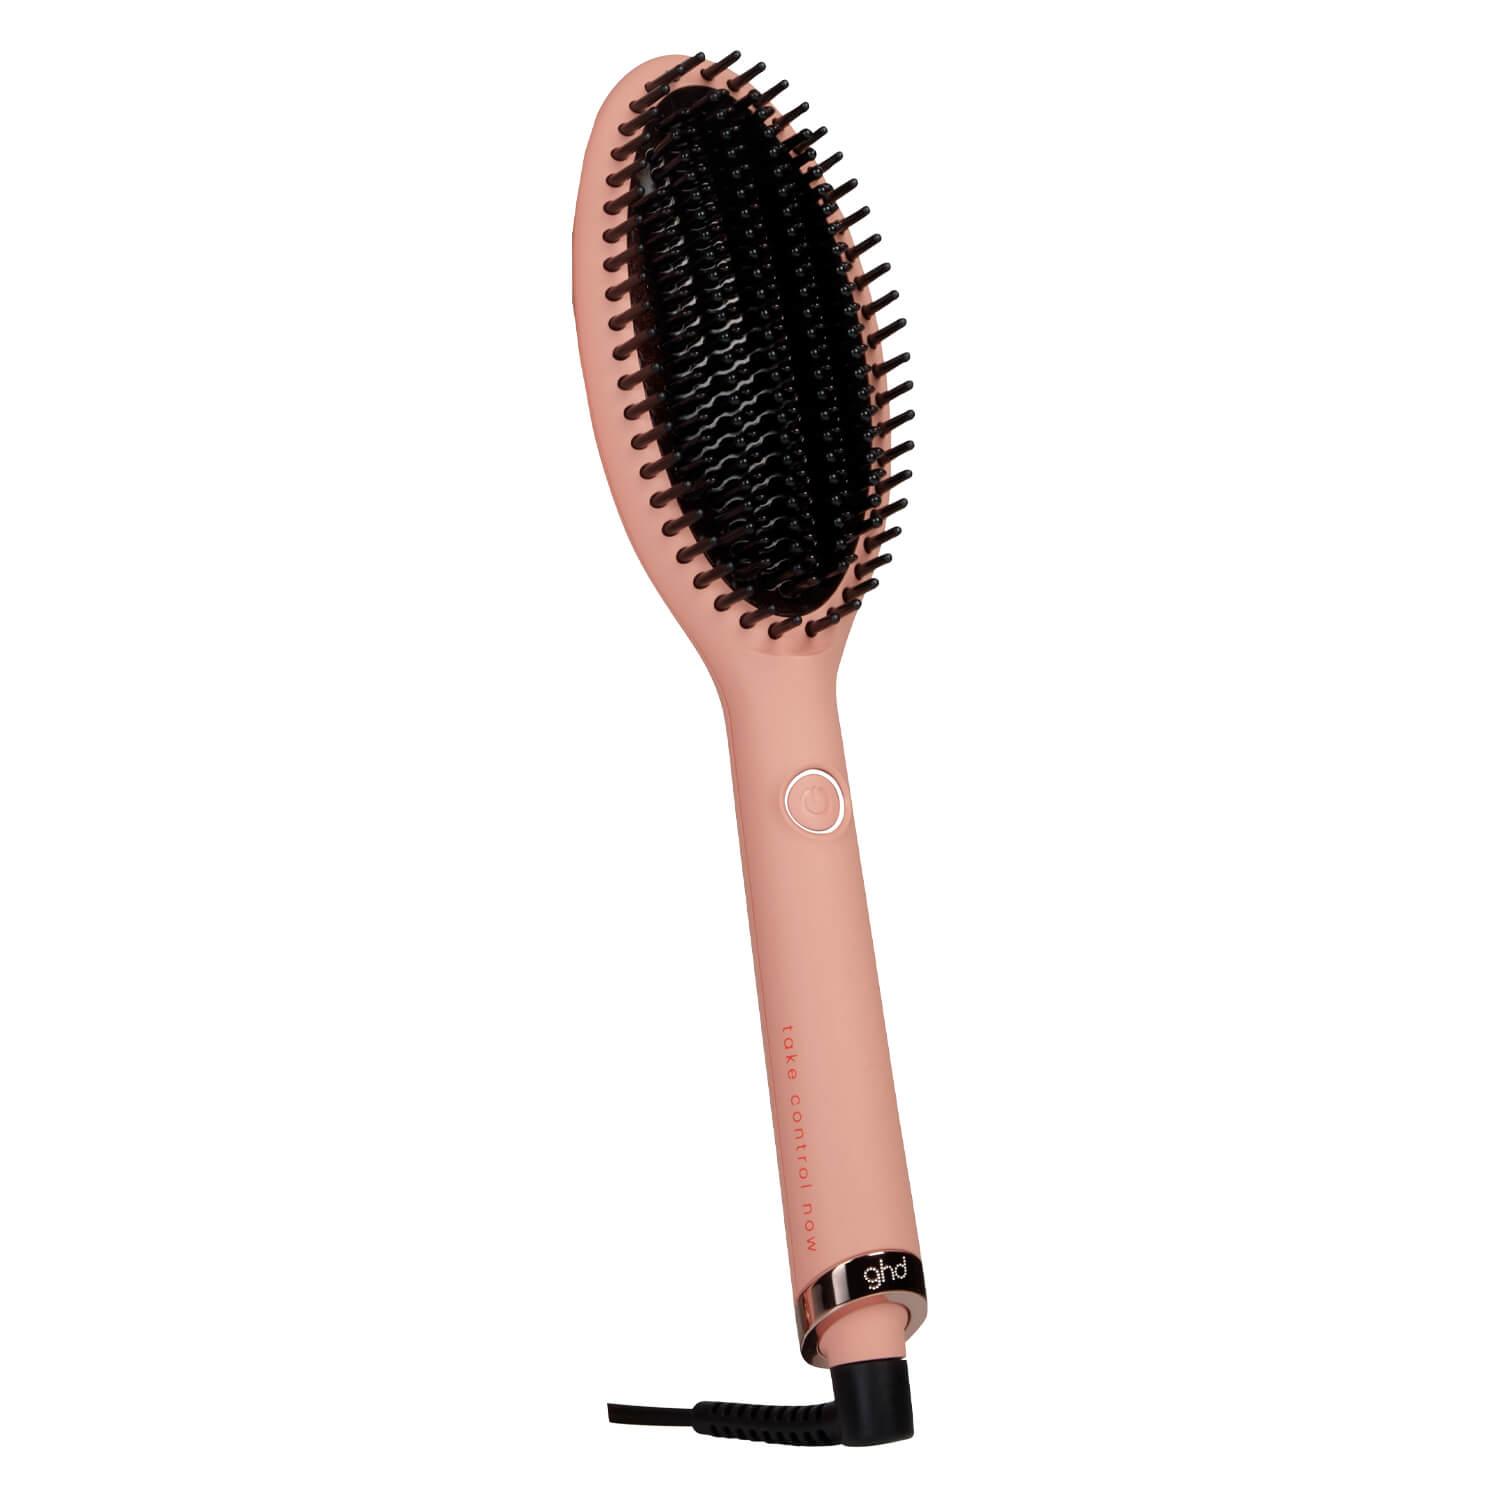 ghd Brushes - Glide Hot Brush Pink Peach Charity Edition